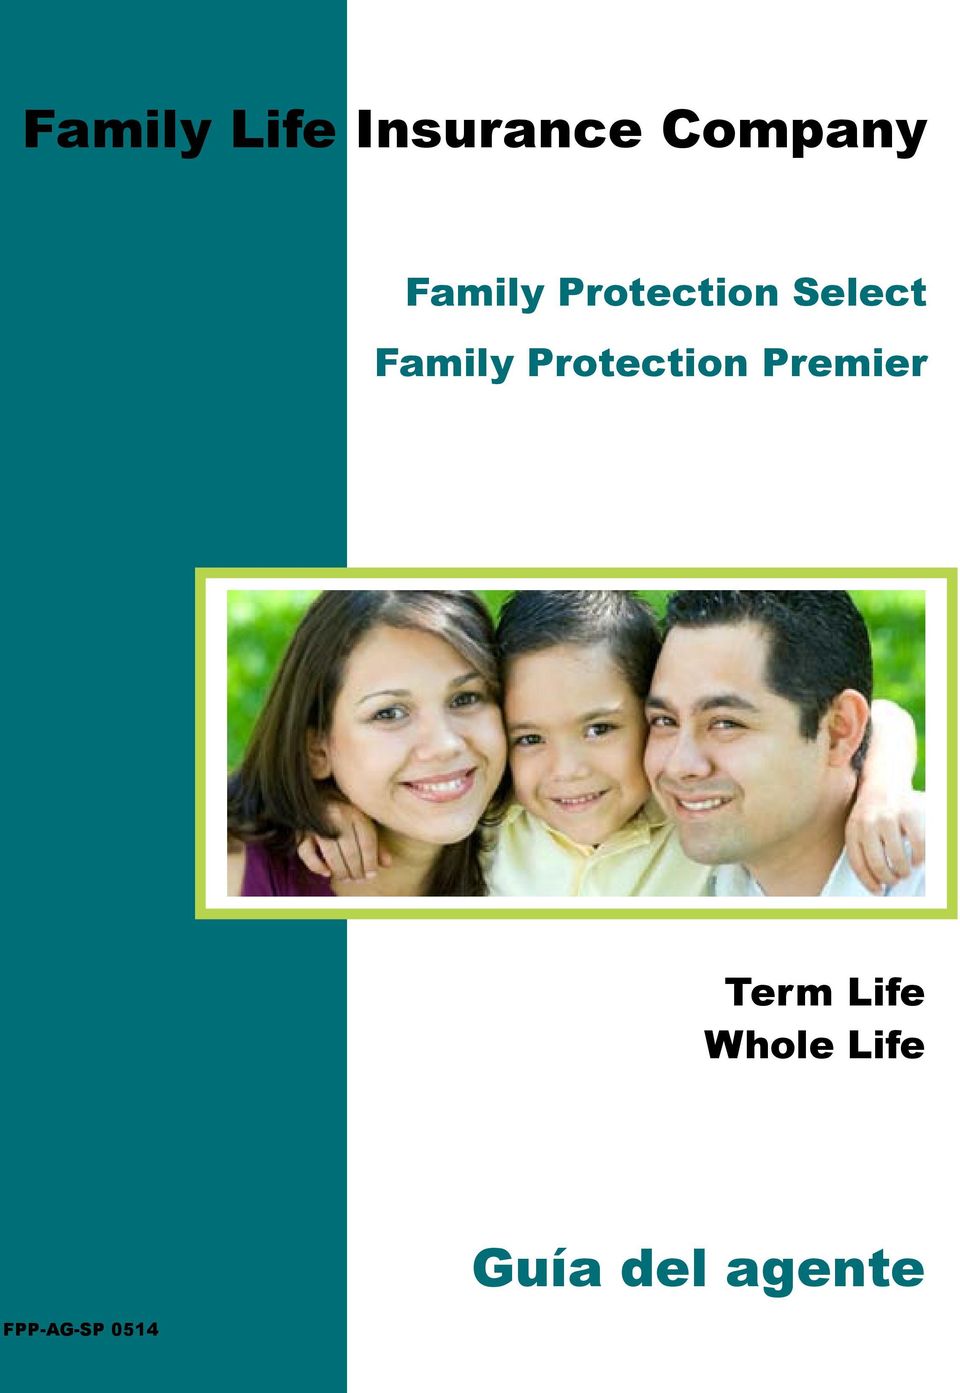 Family Protection Premier